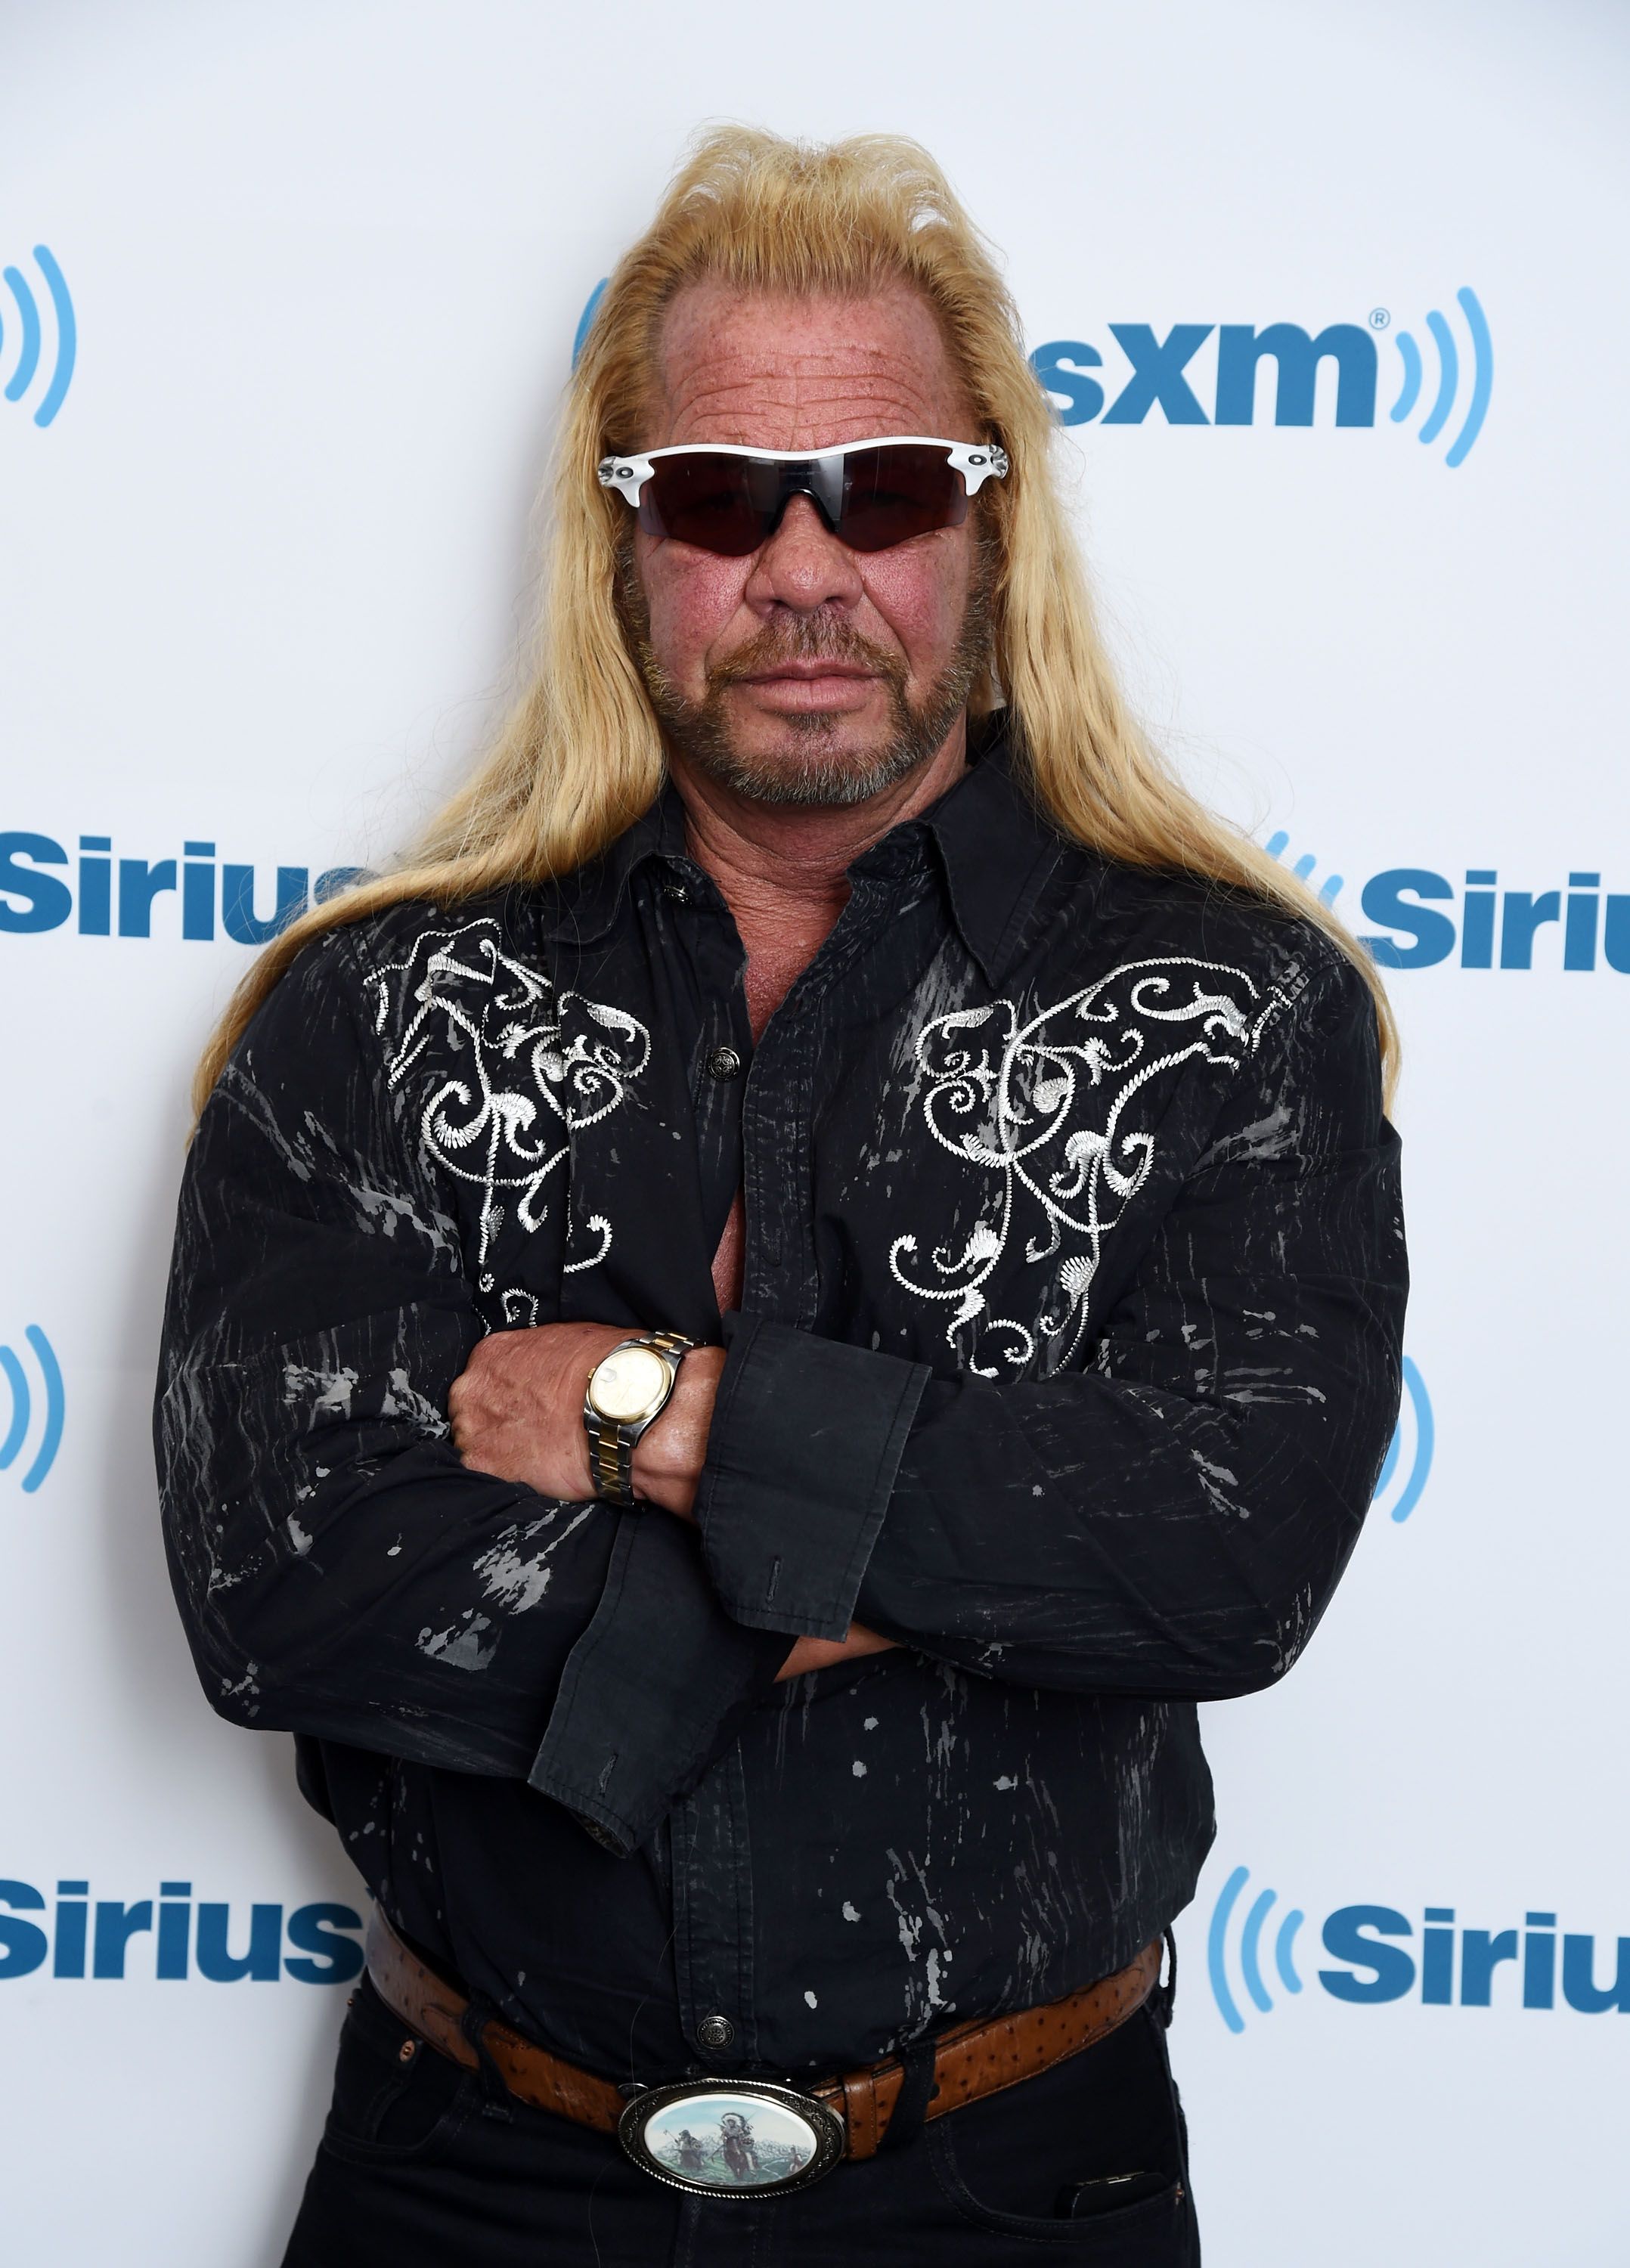 Dog the Bounty Hunter, Duane Chapman at the SiriusXM Studios on April 24, 2015 | Photo: Getty Images